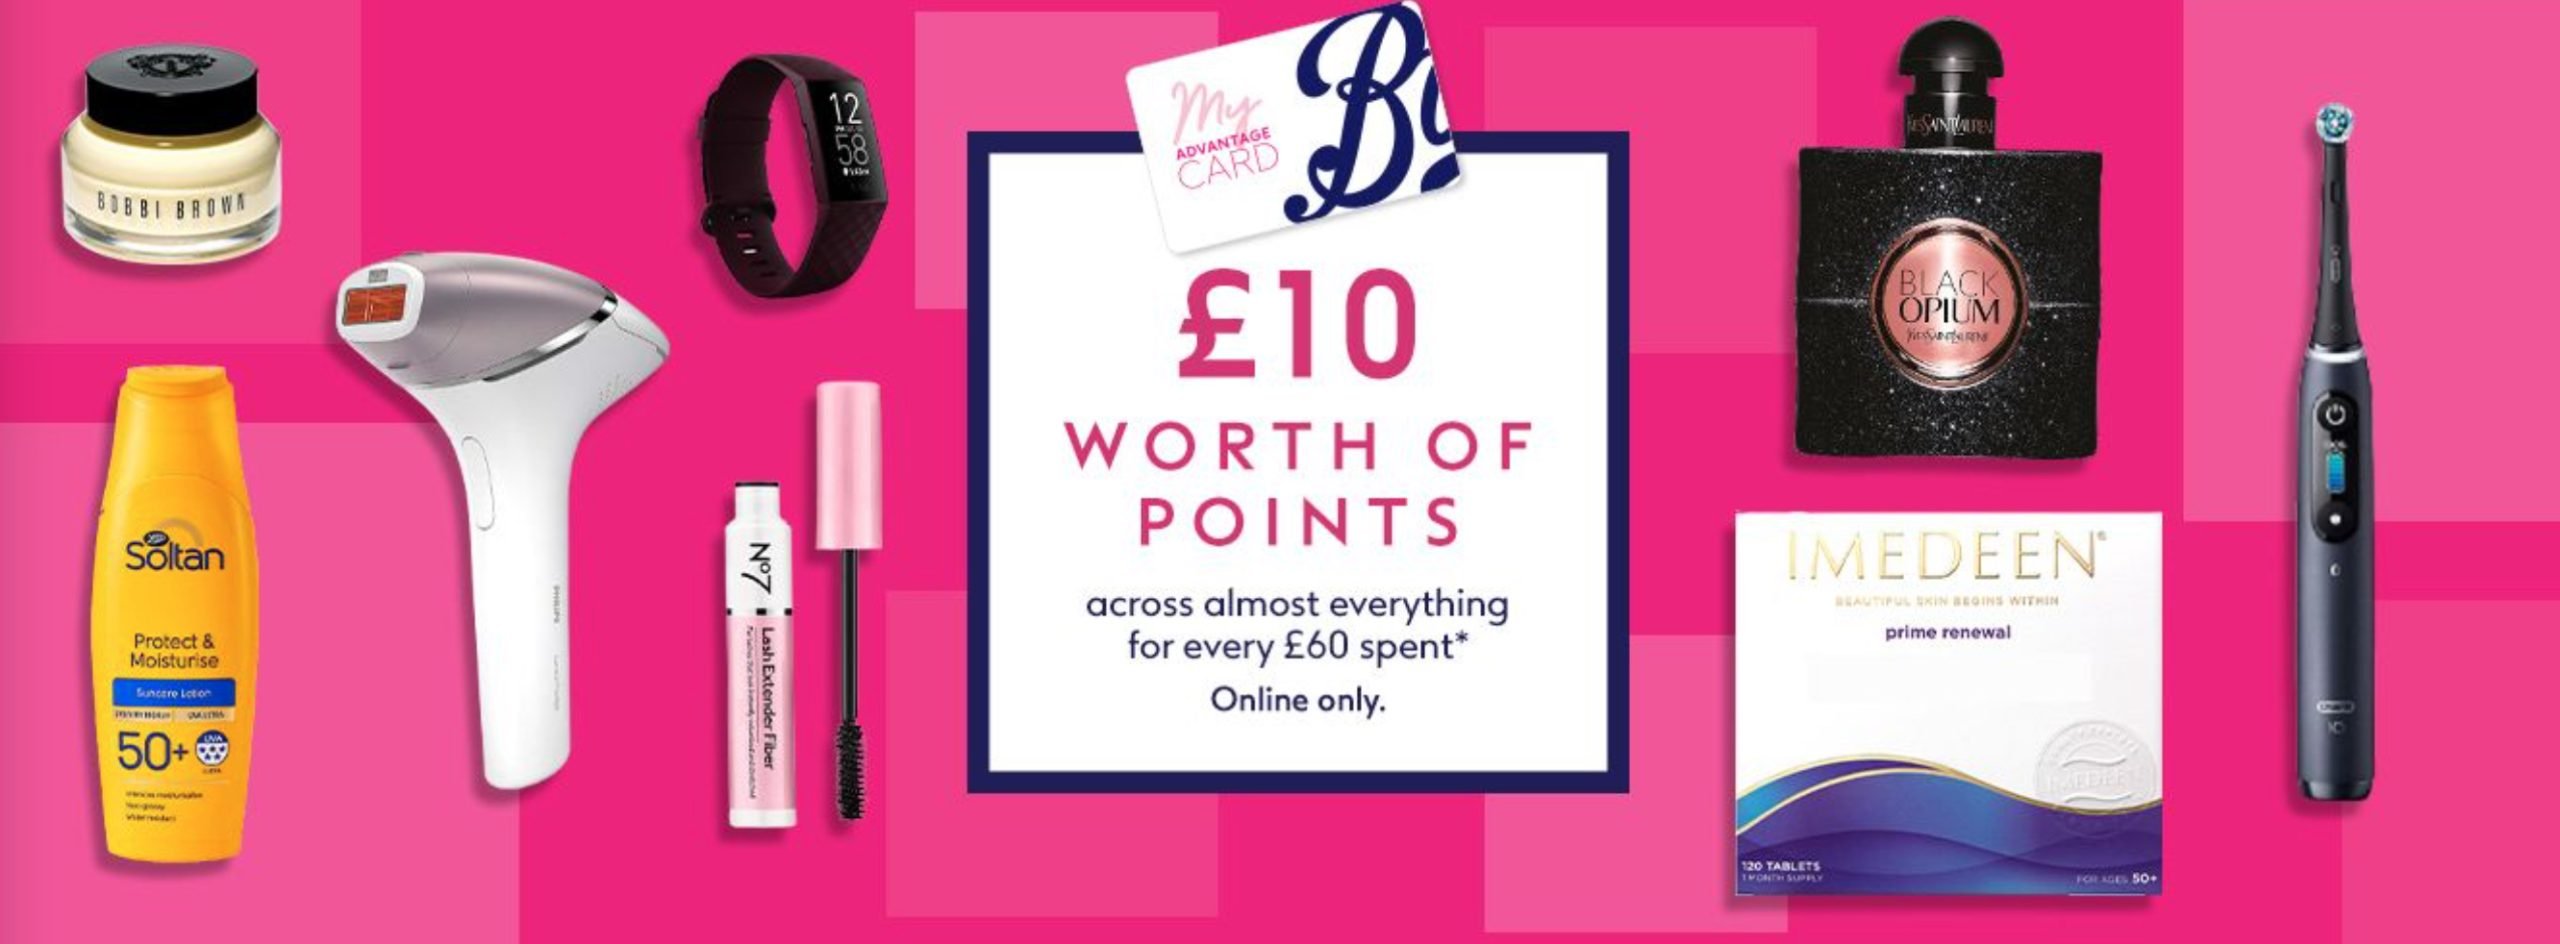 £10 worth of points across everything for every £60 spent at Boots